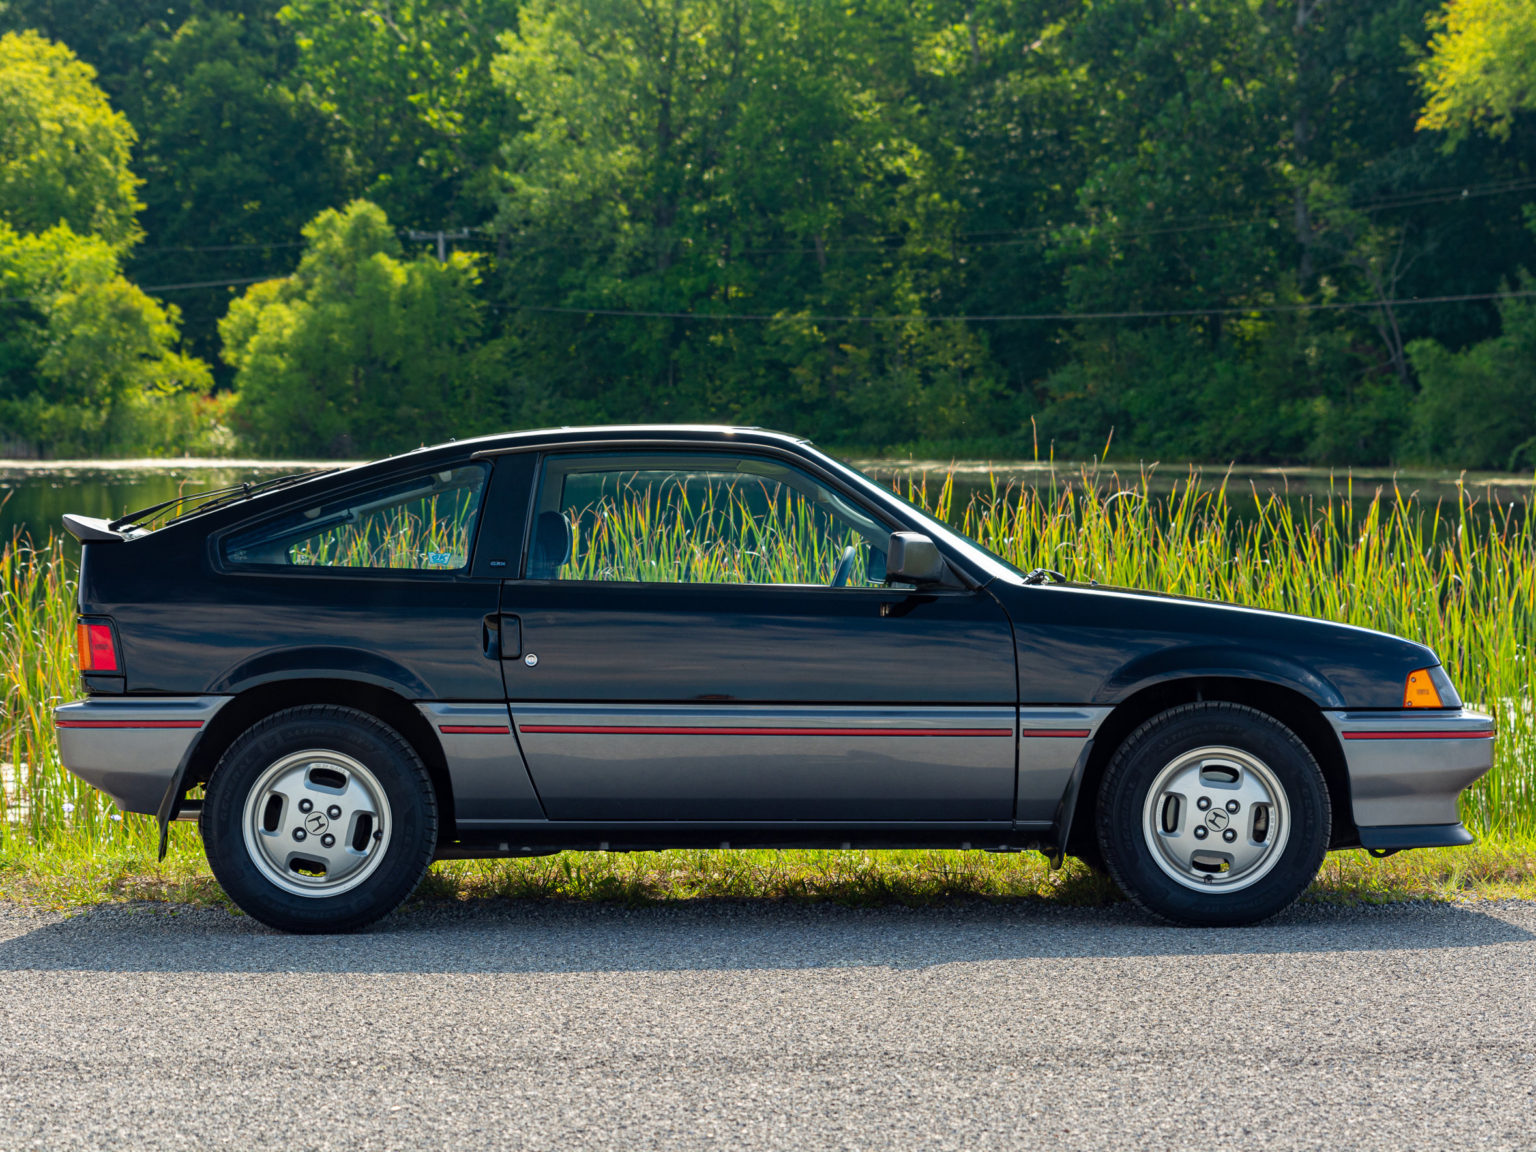 The 1985 Honda Civic CRX Si is a throwback to a time when sports cars were sports cars and Honda broke the rules.